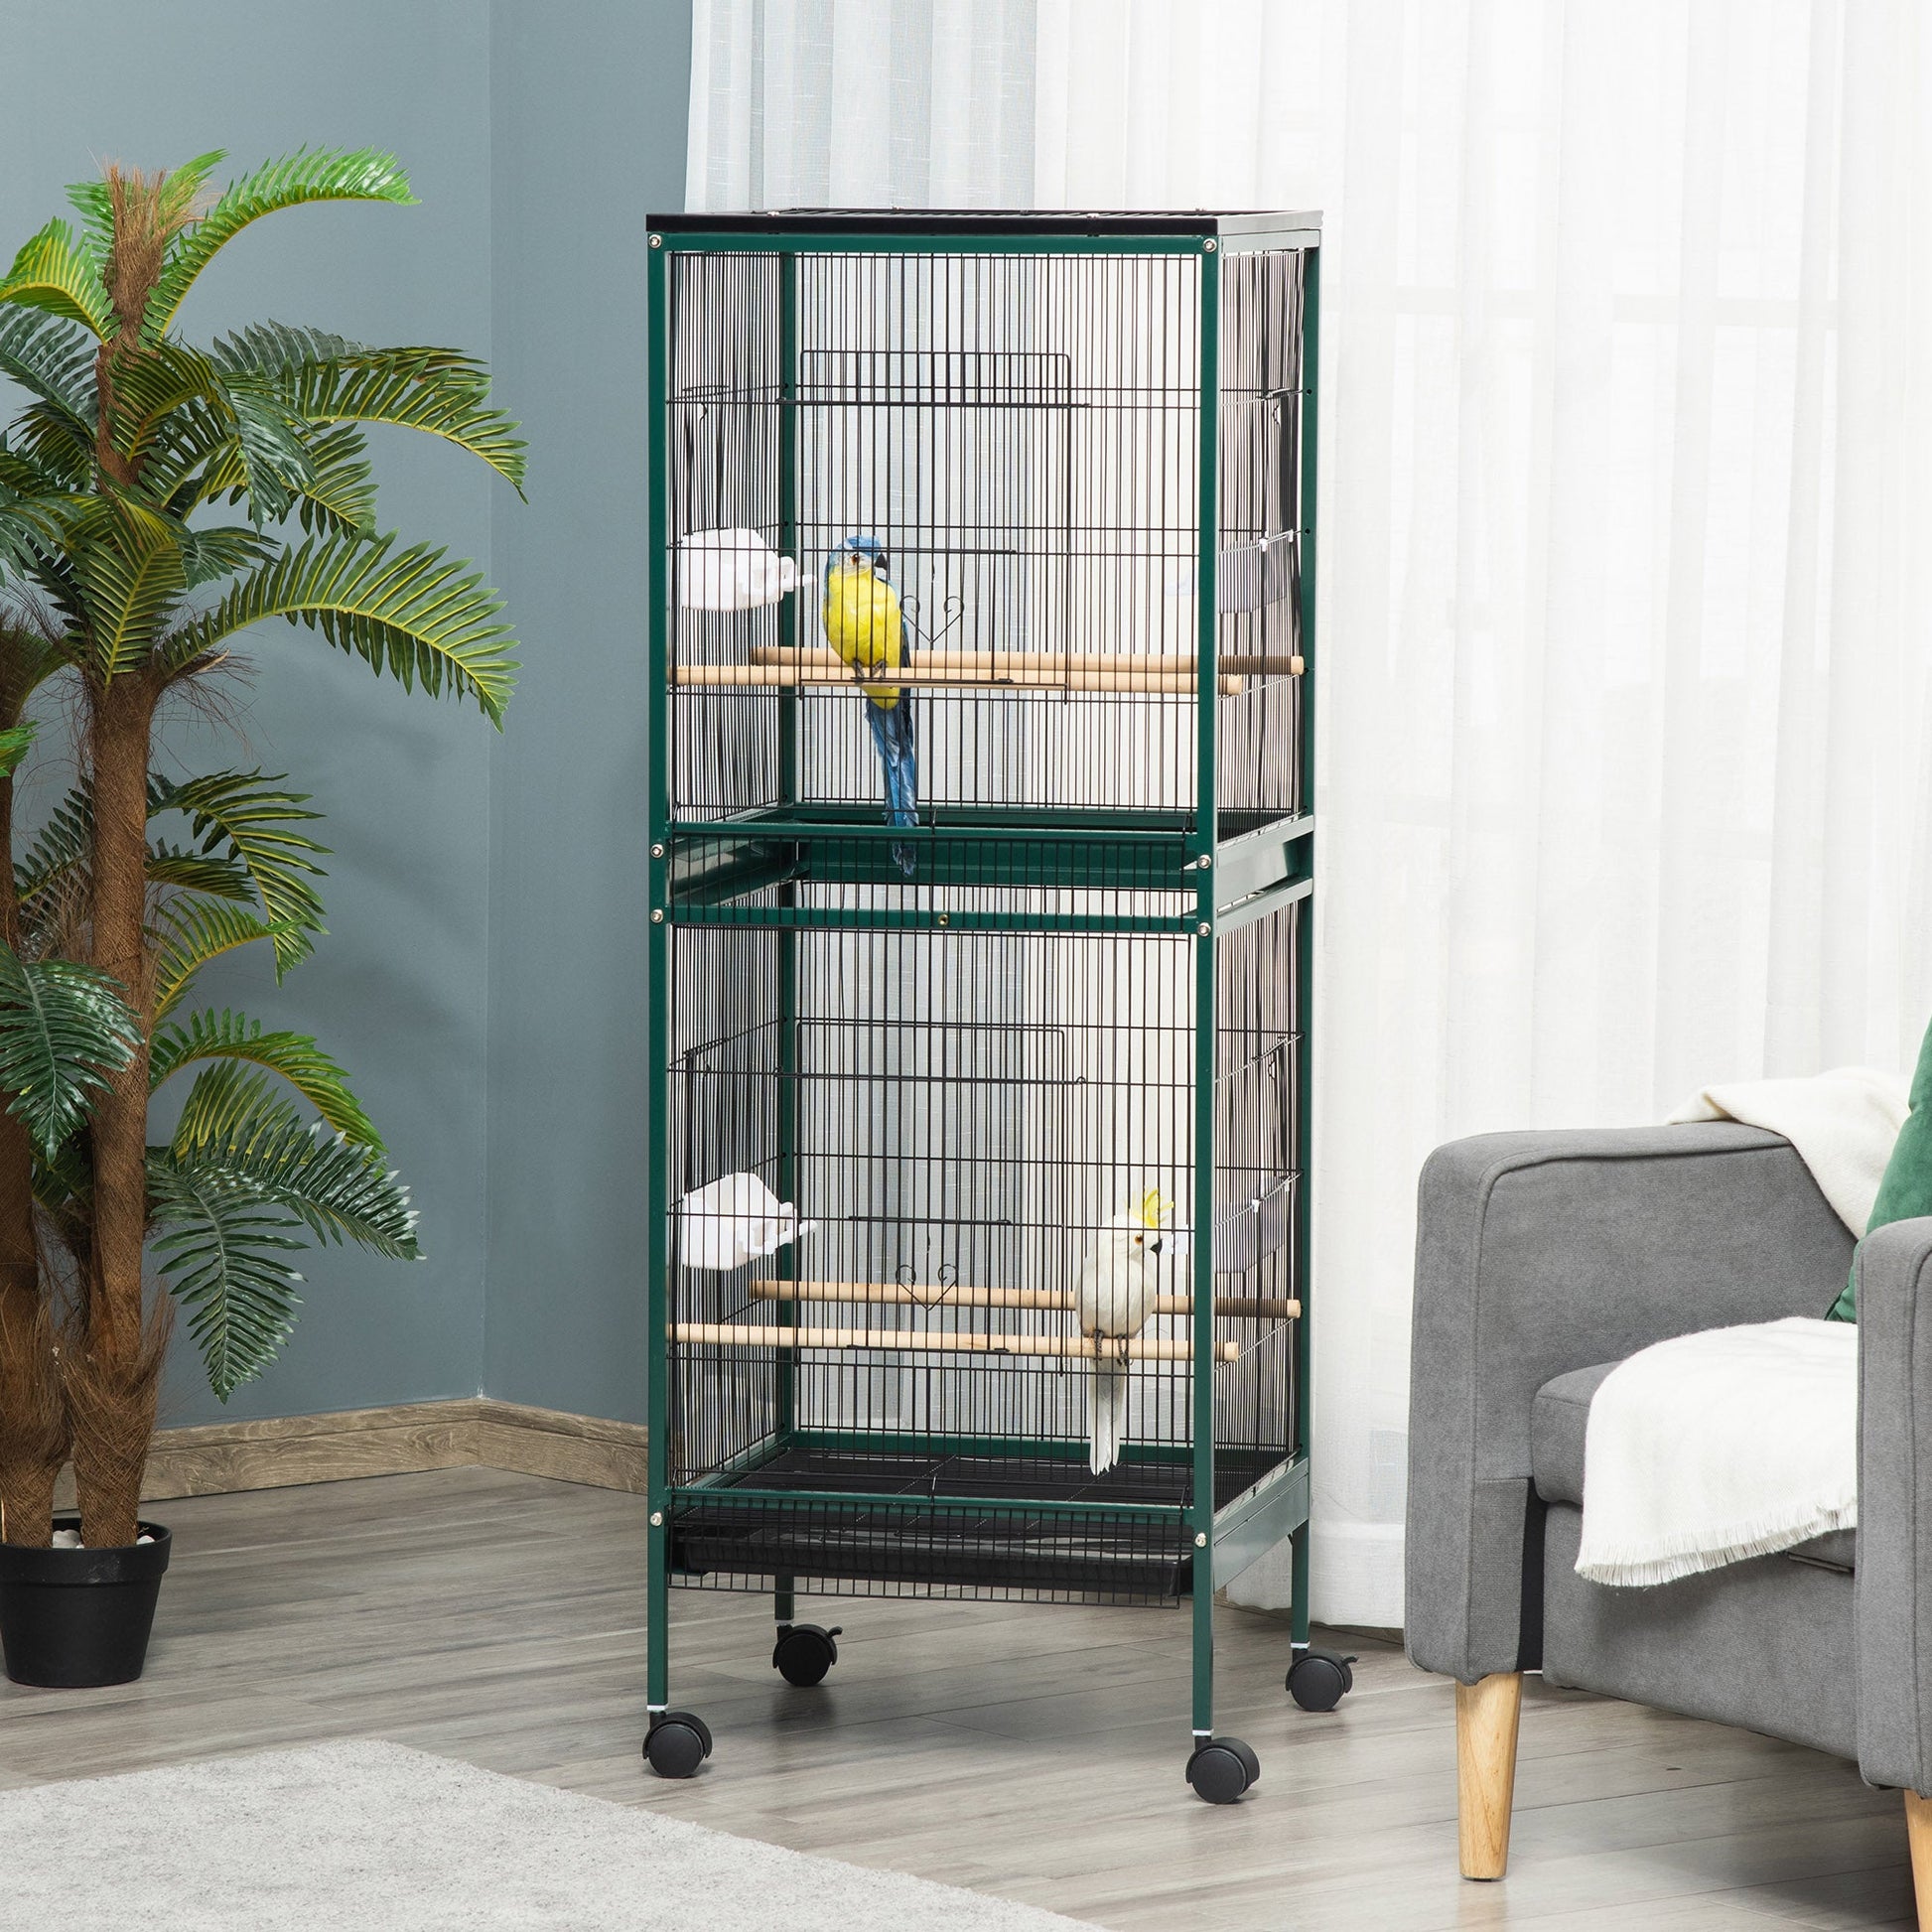 55.1" 2 In 1 Bird Cage Aviary Parakeet House for finches, budgies with Wheels, Slide-out Trays, Wood Perch, Green at Gallery Canada